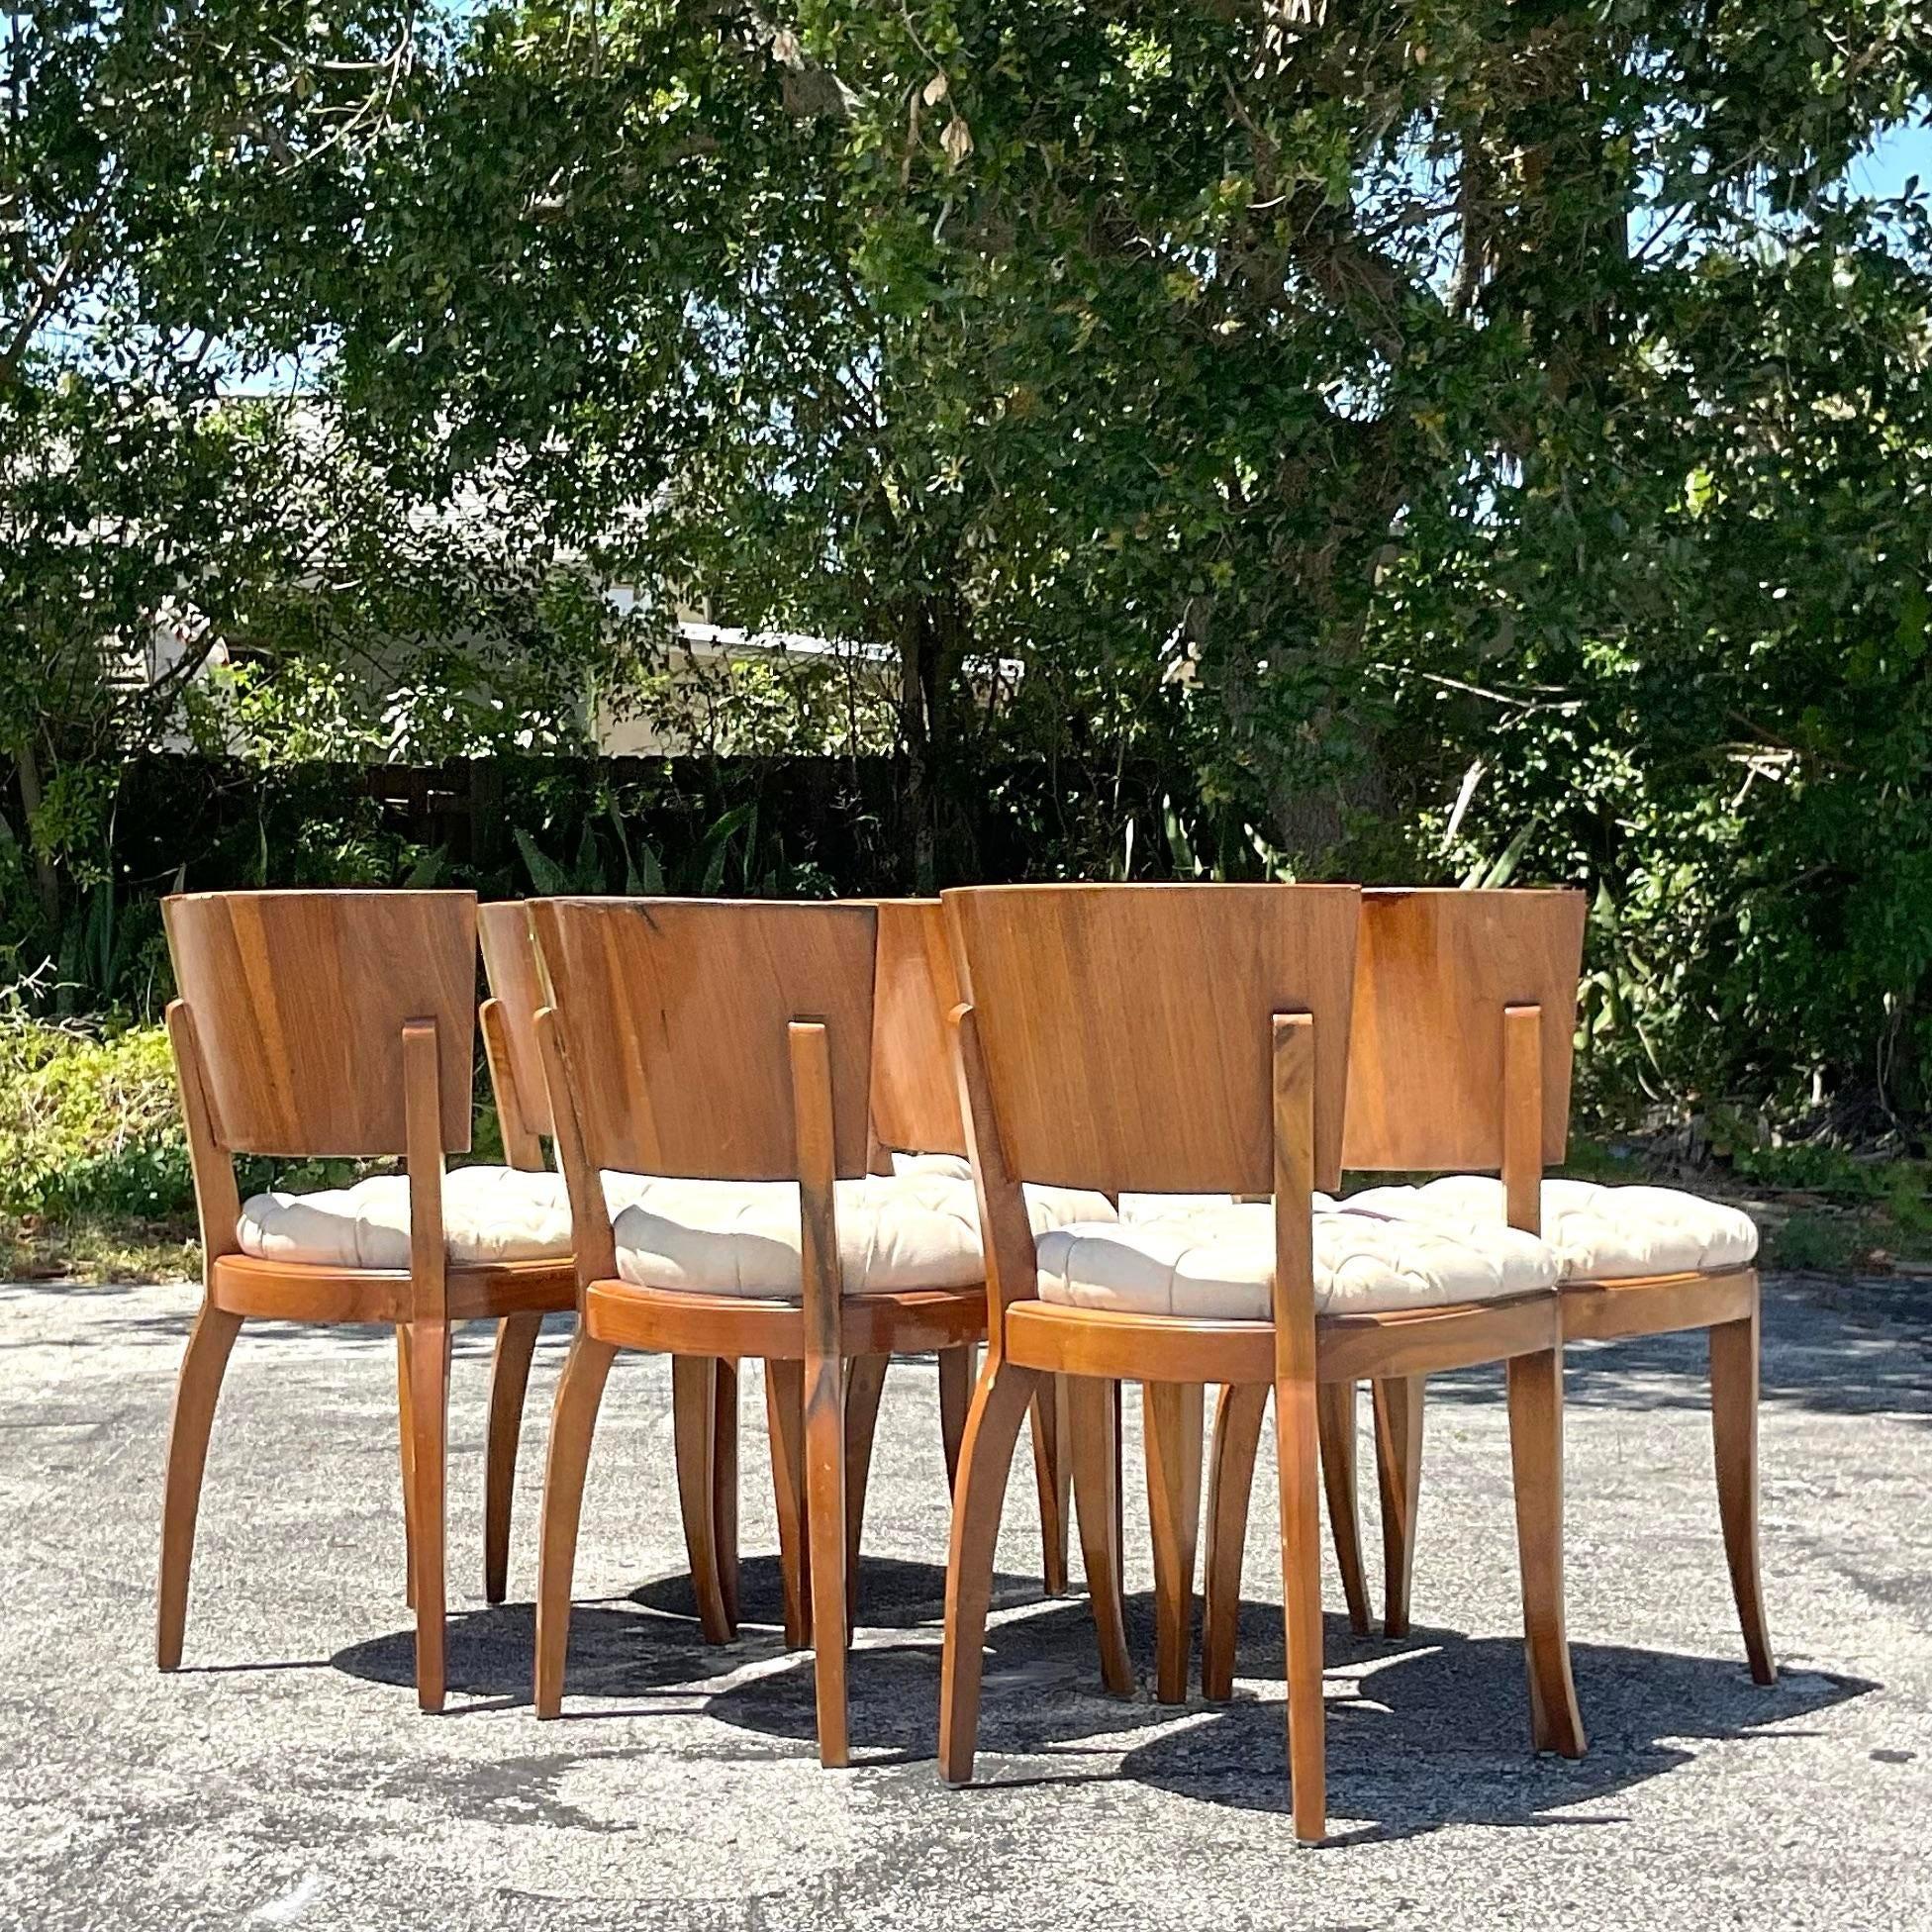 Vintage Deco Burl Wood Dining Chairs - Set of 6 For Sale 2